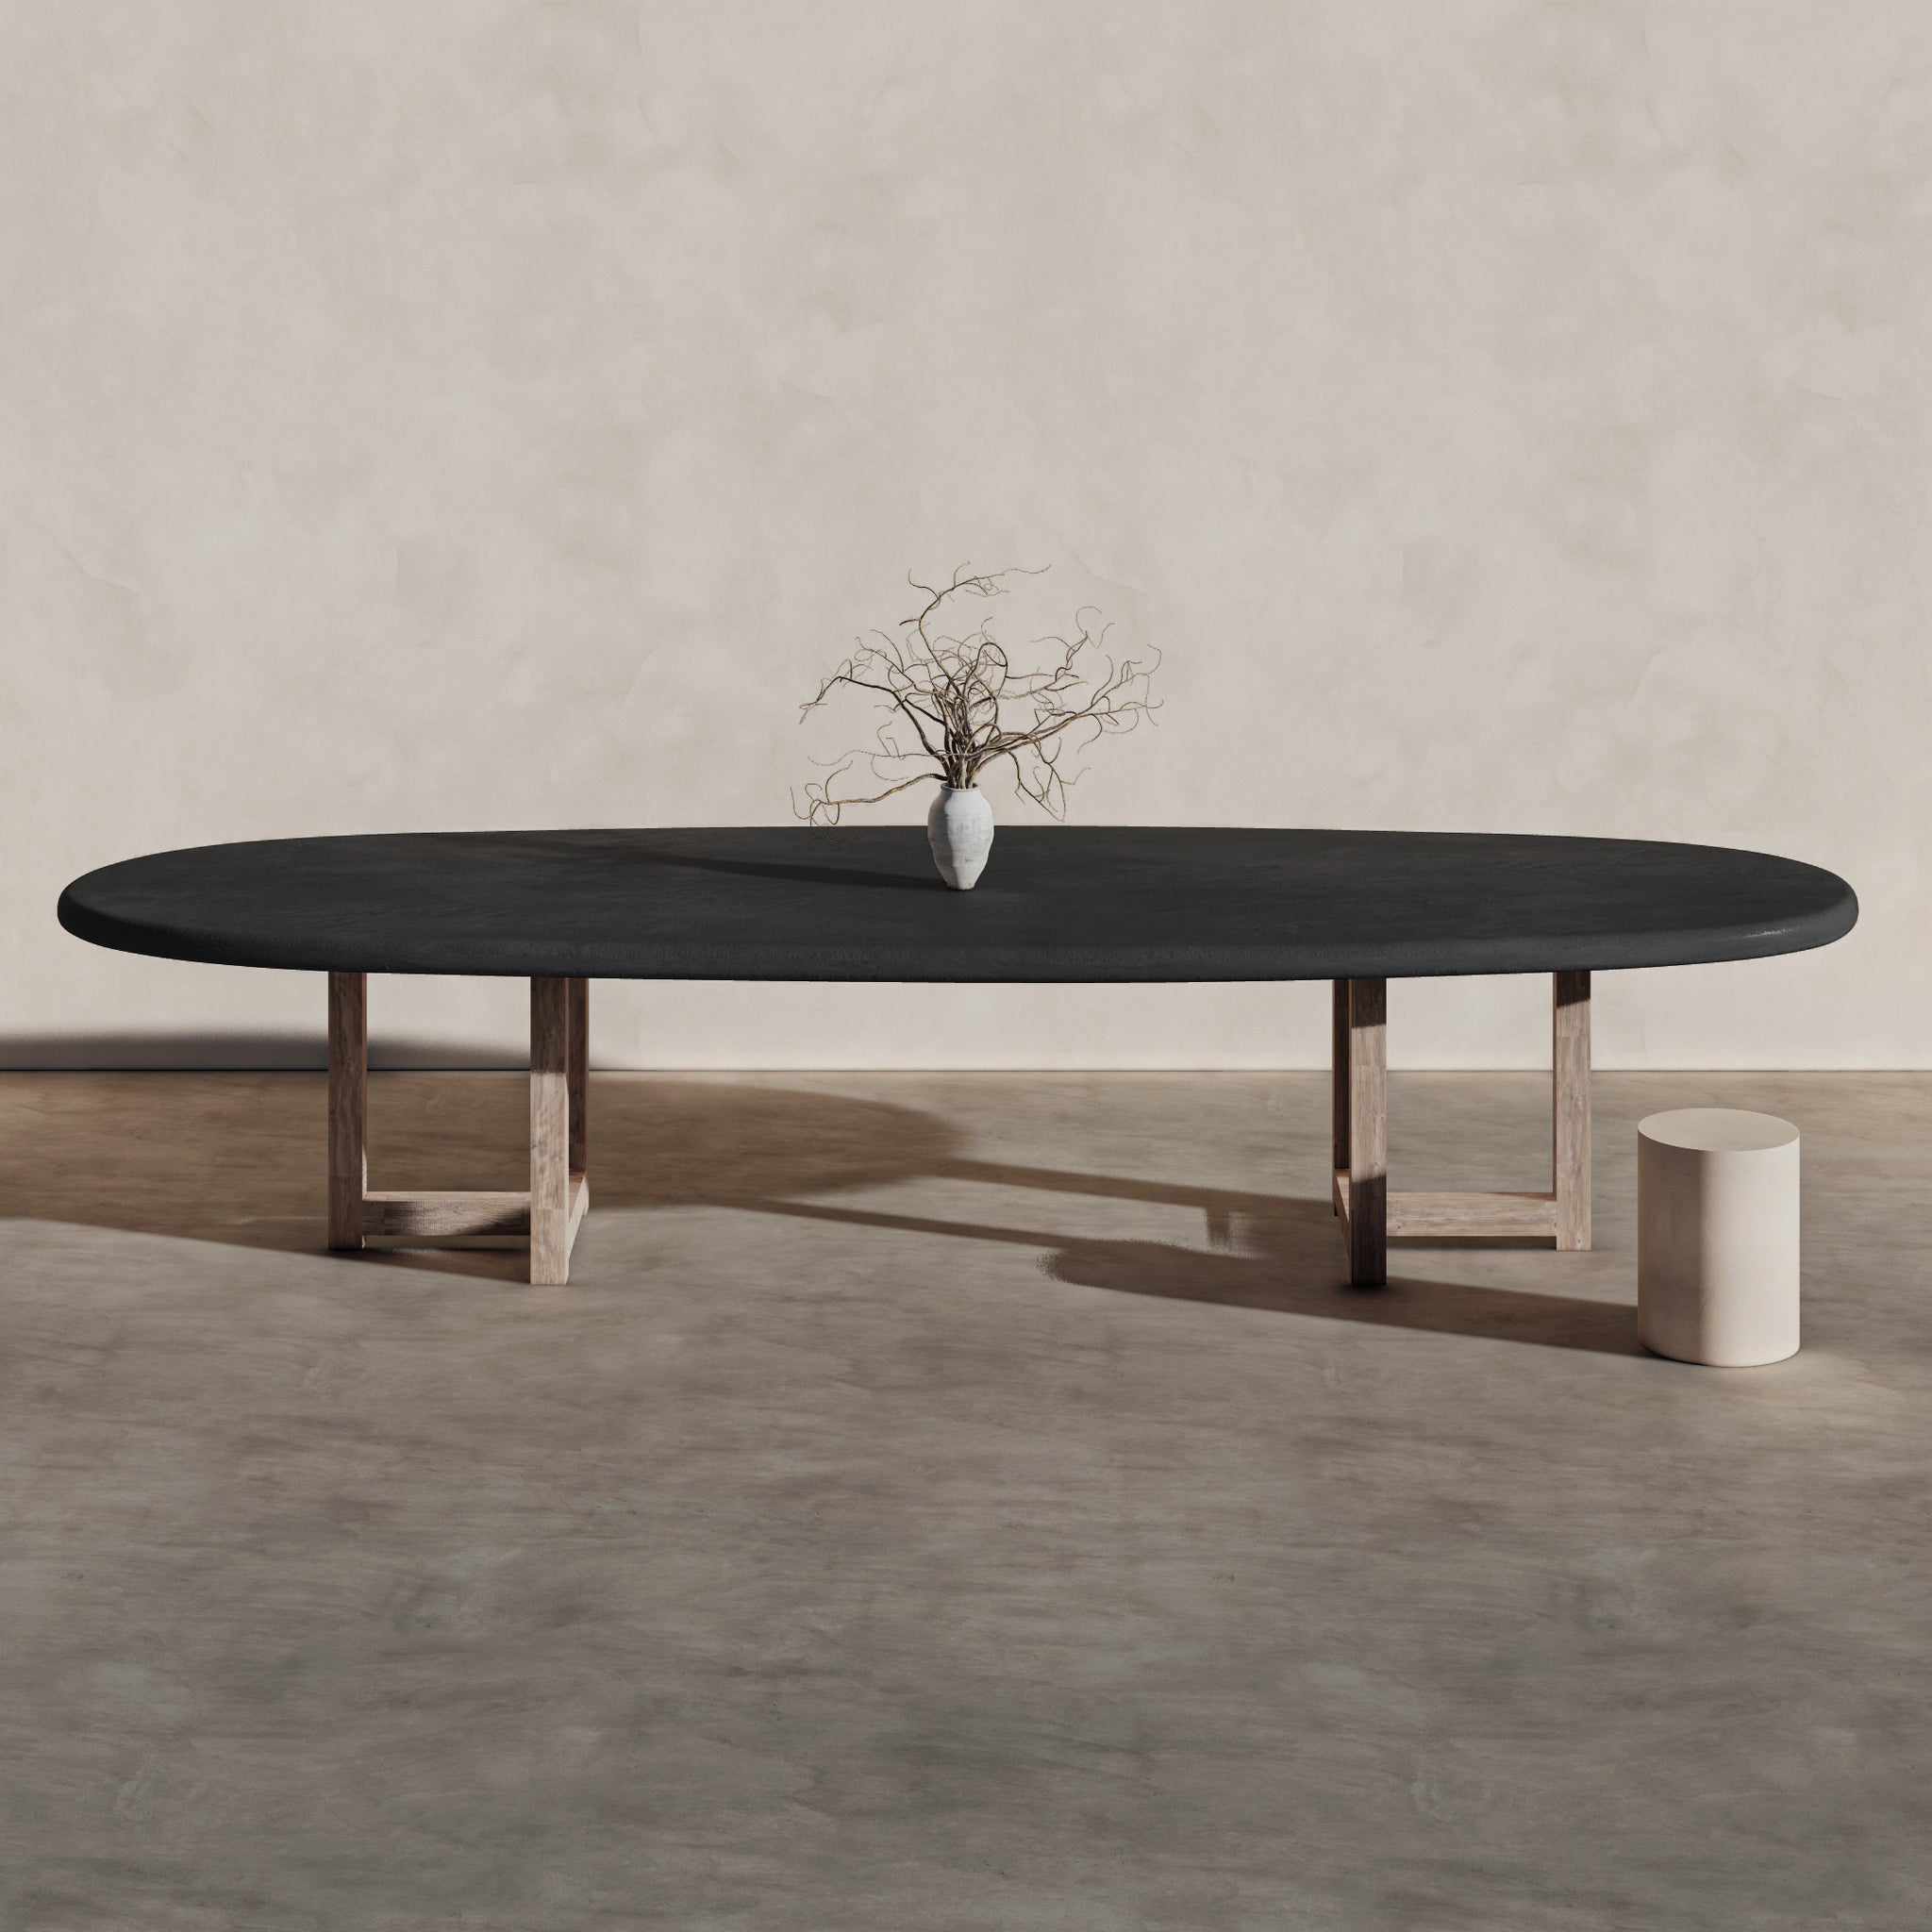 Oval Long Dining Table with Wooden Legs